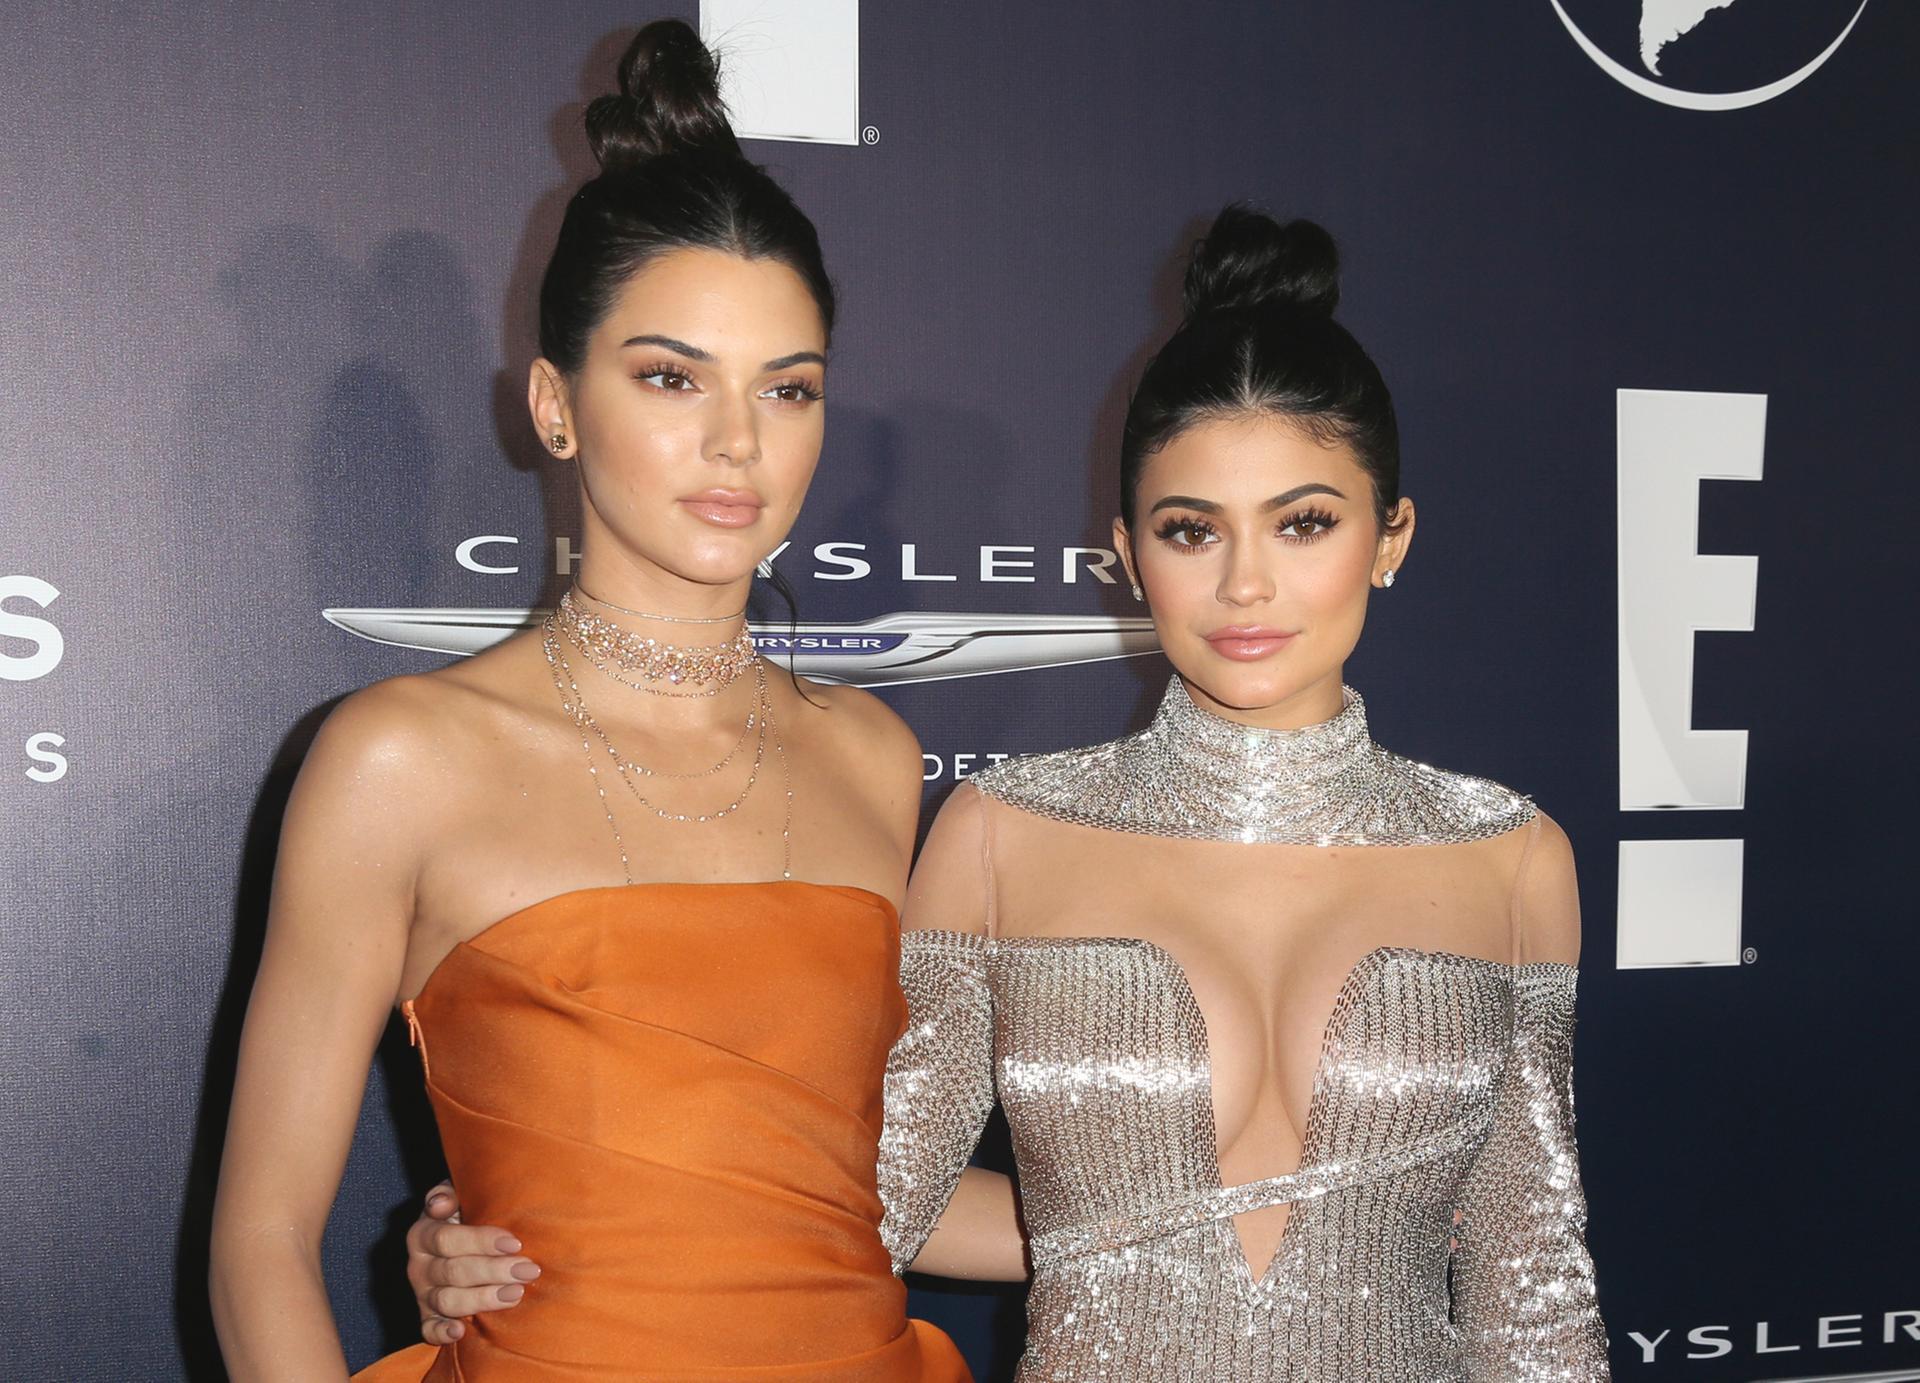 Kendall And Kyllie Jenner Have Launched A Standalone Fashion Brand